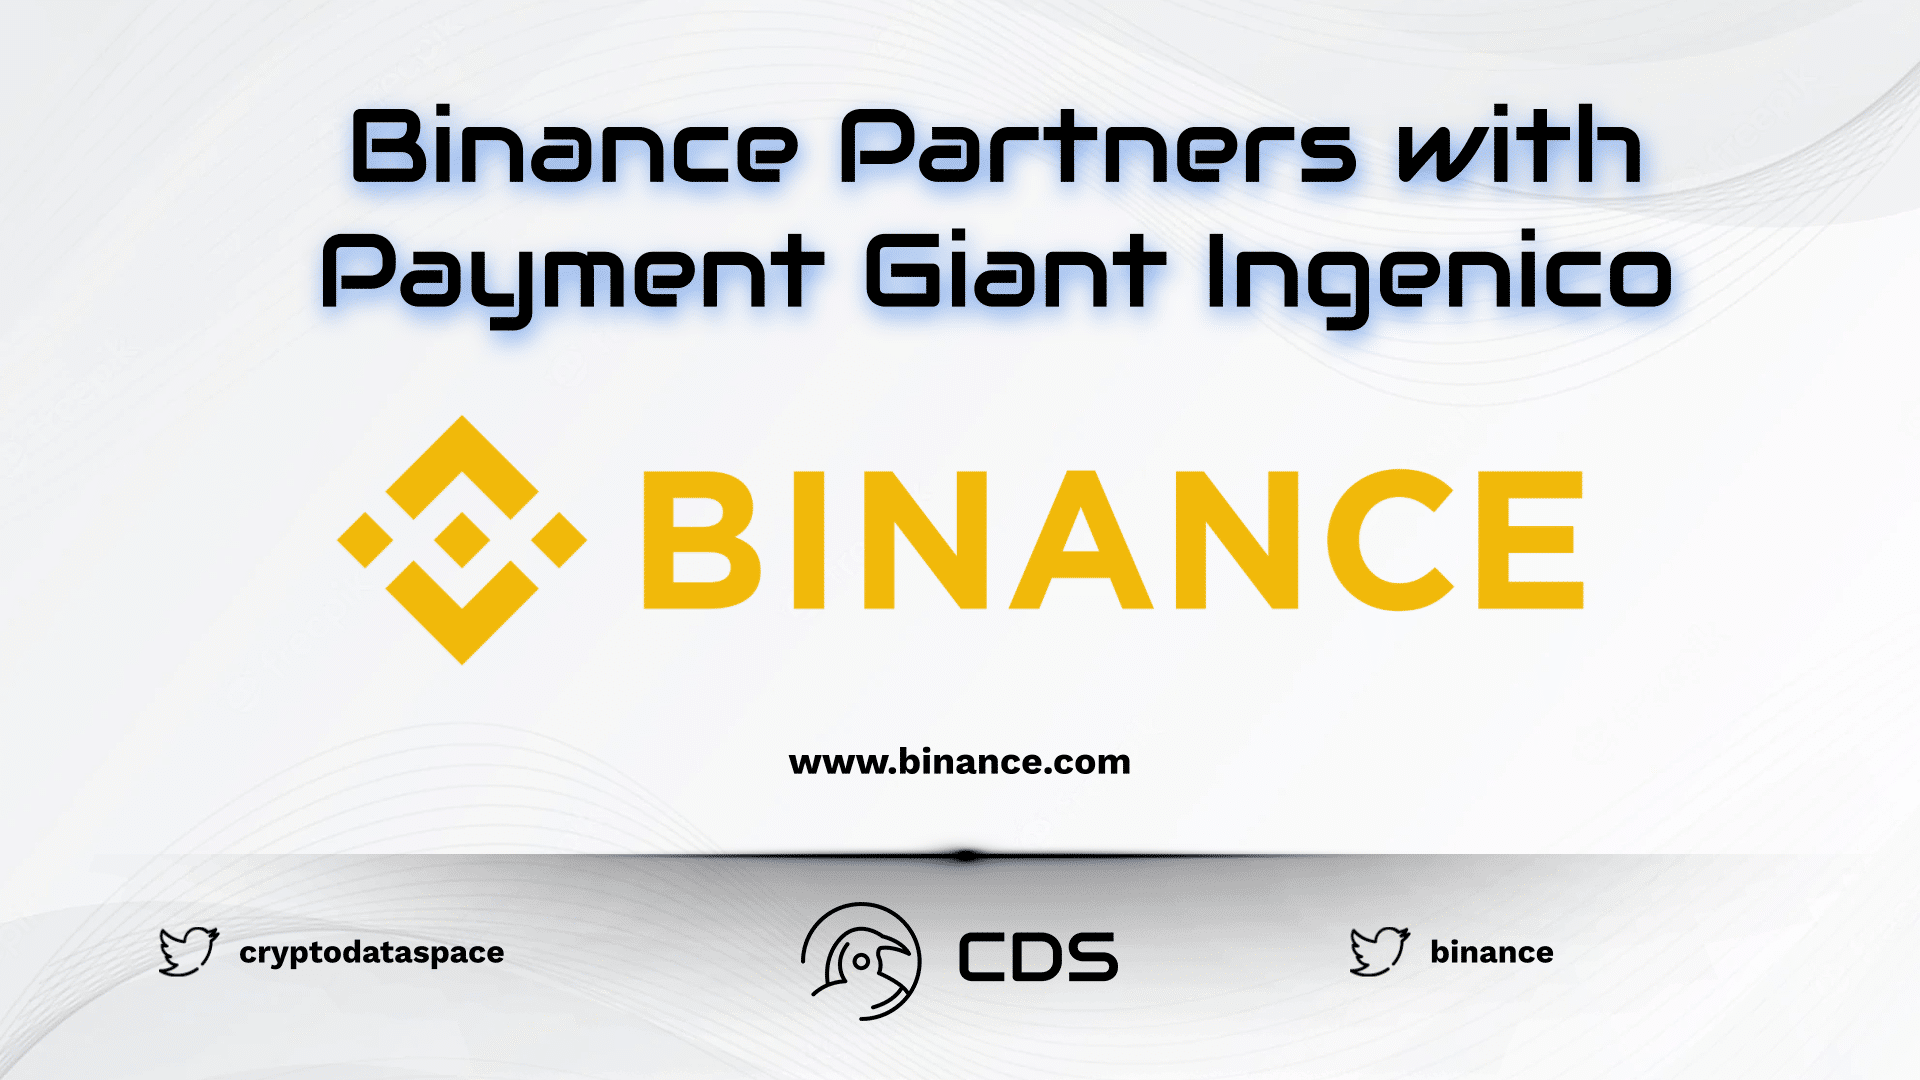 Binance Partners with Payment Giant Ingenico